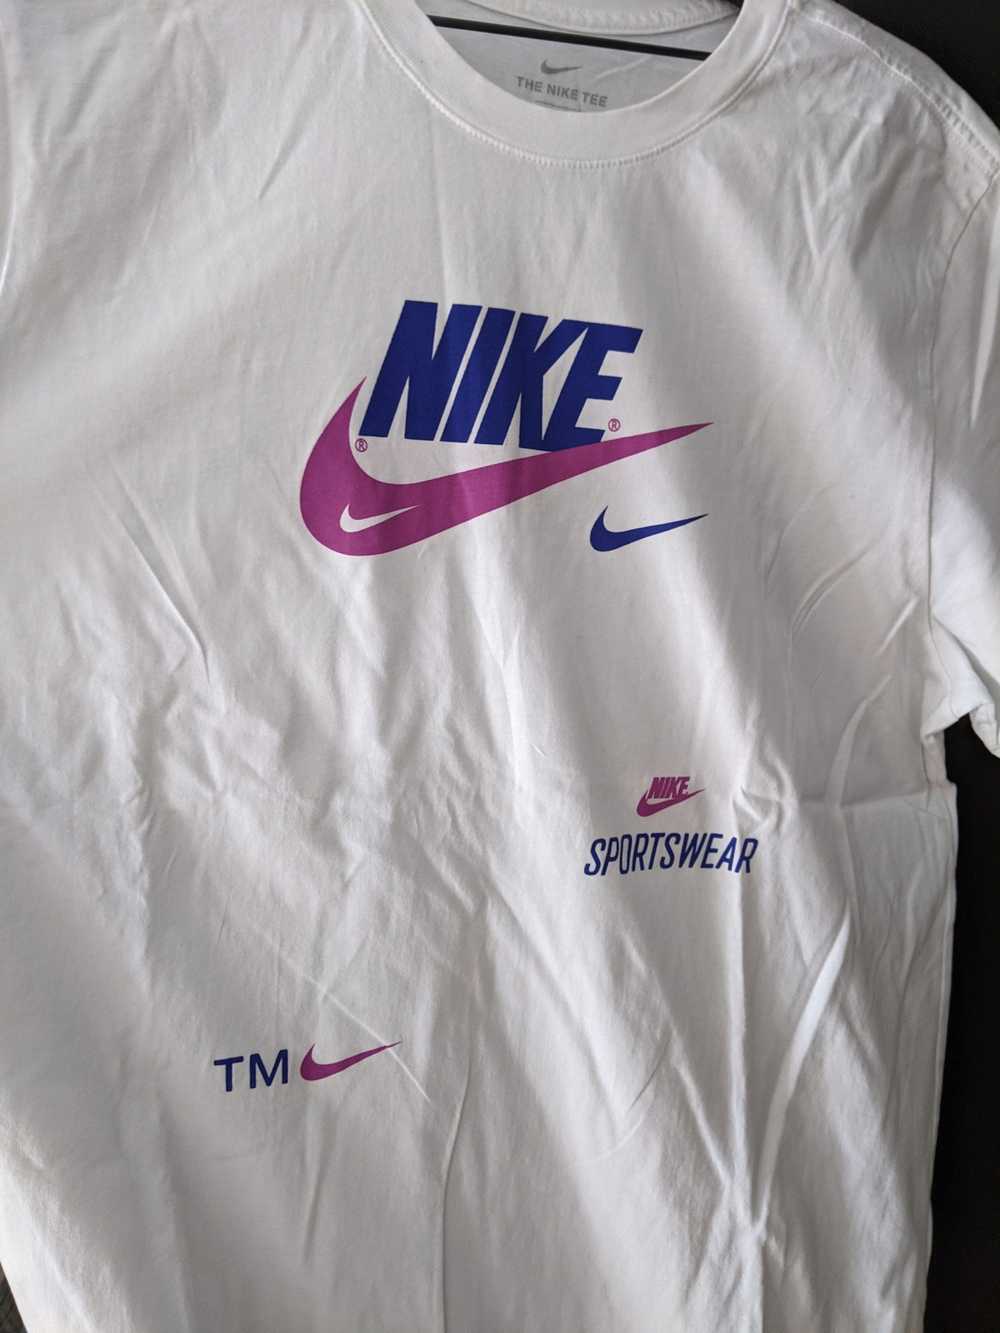 Nike 2-Pack "Over Branding" Nike Cotton T-Shirts - image 3